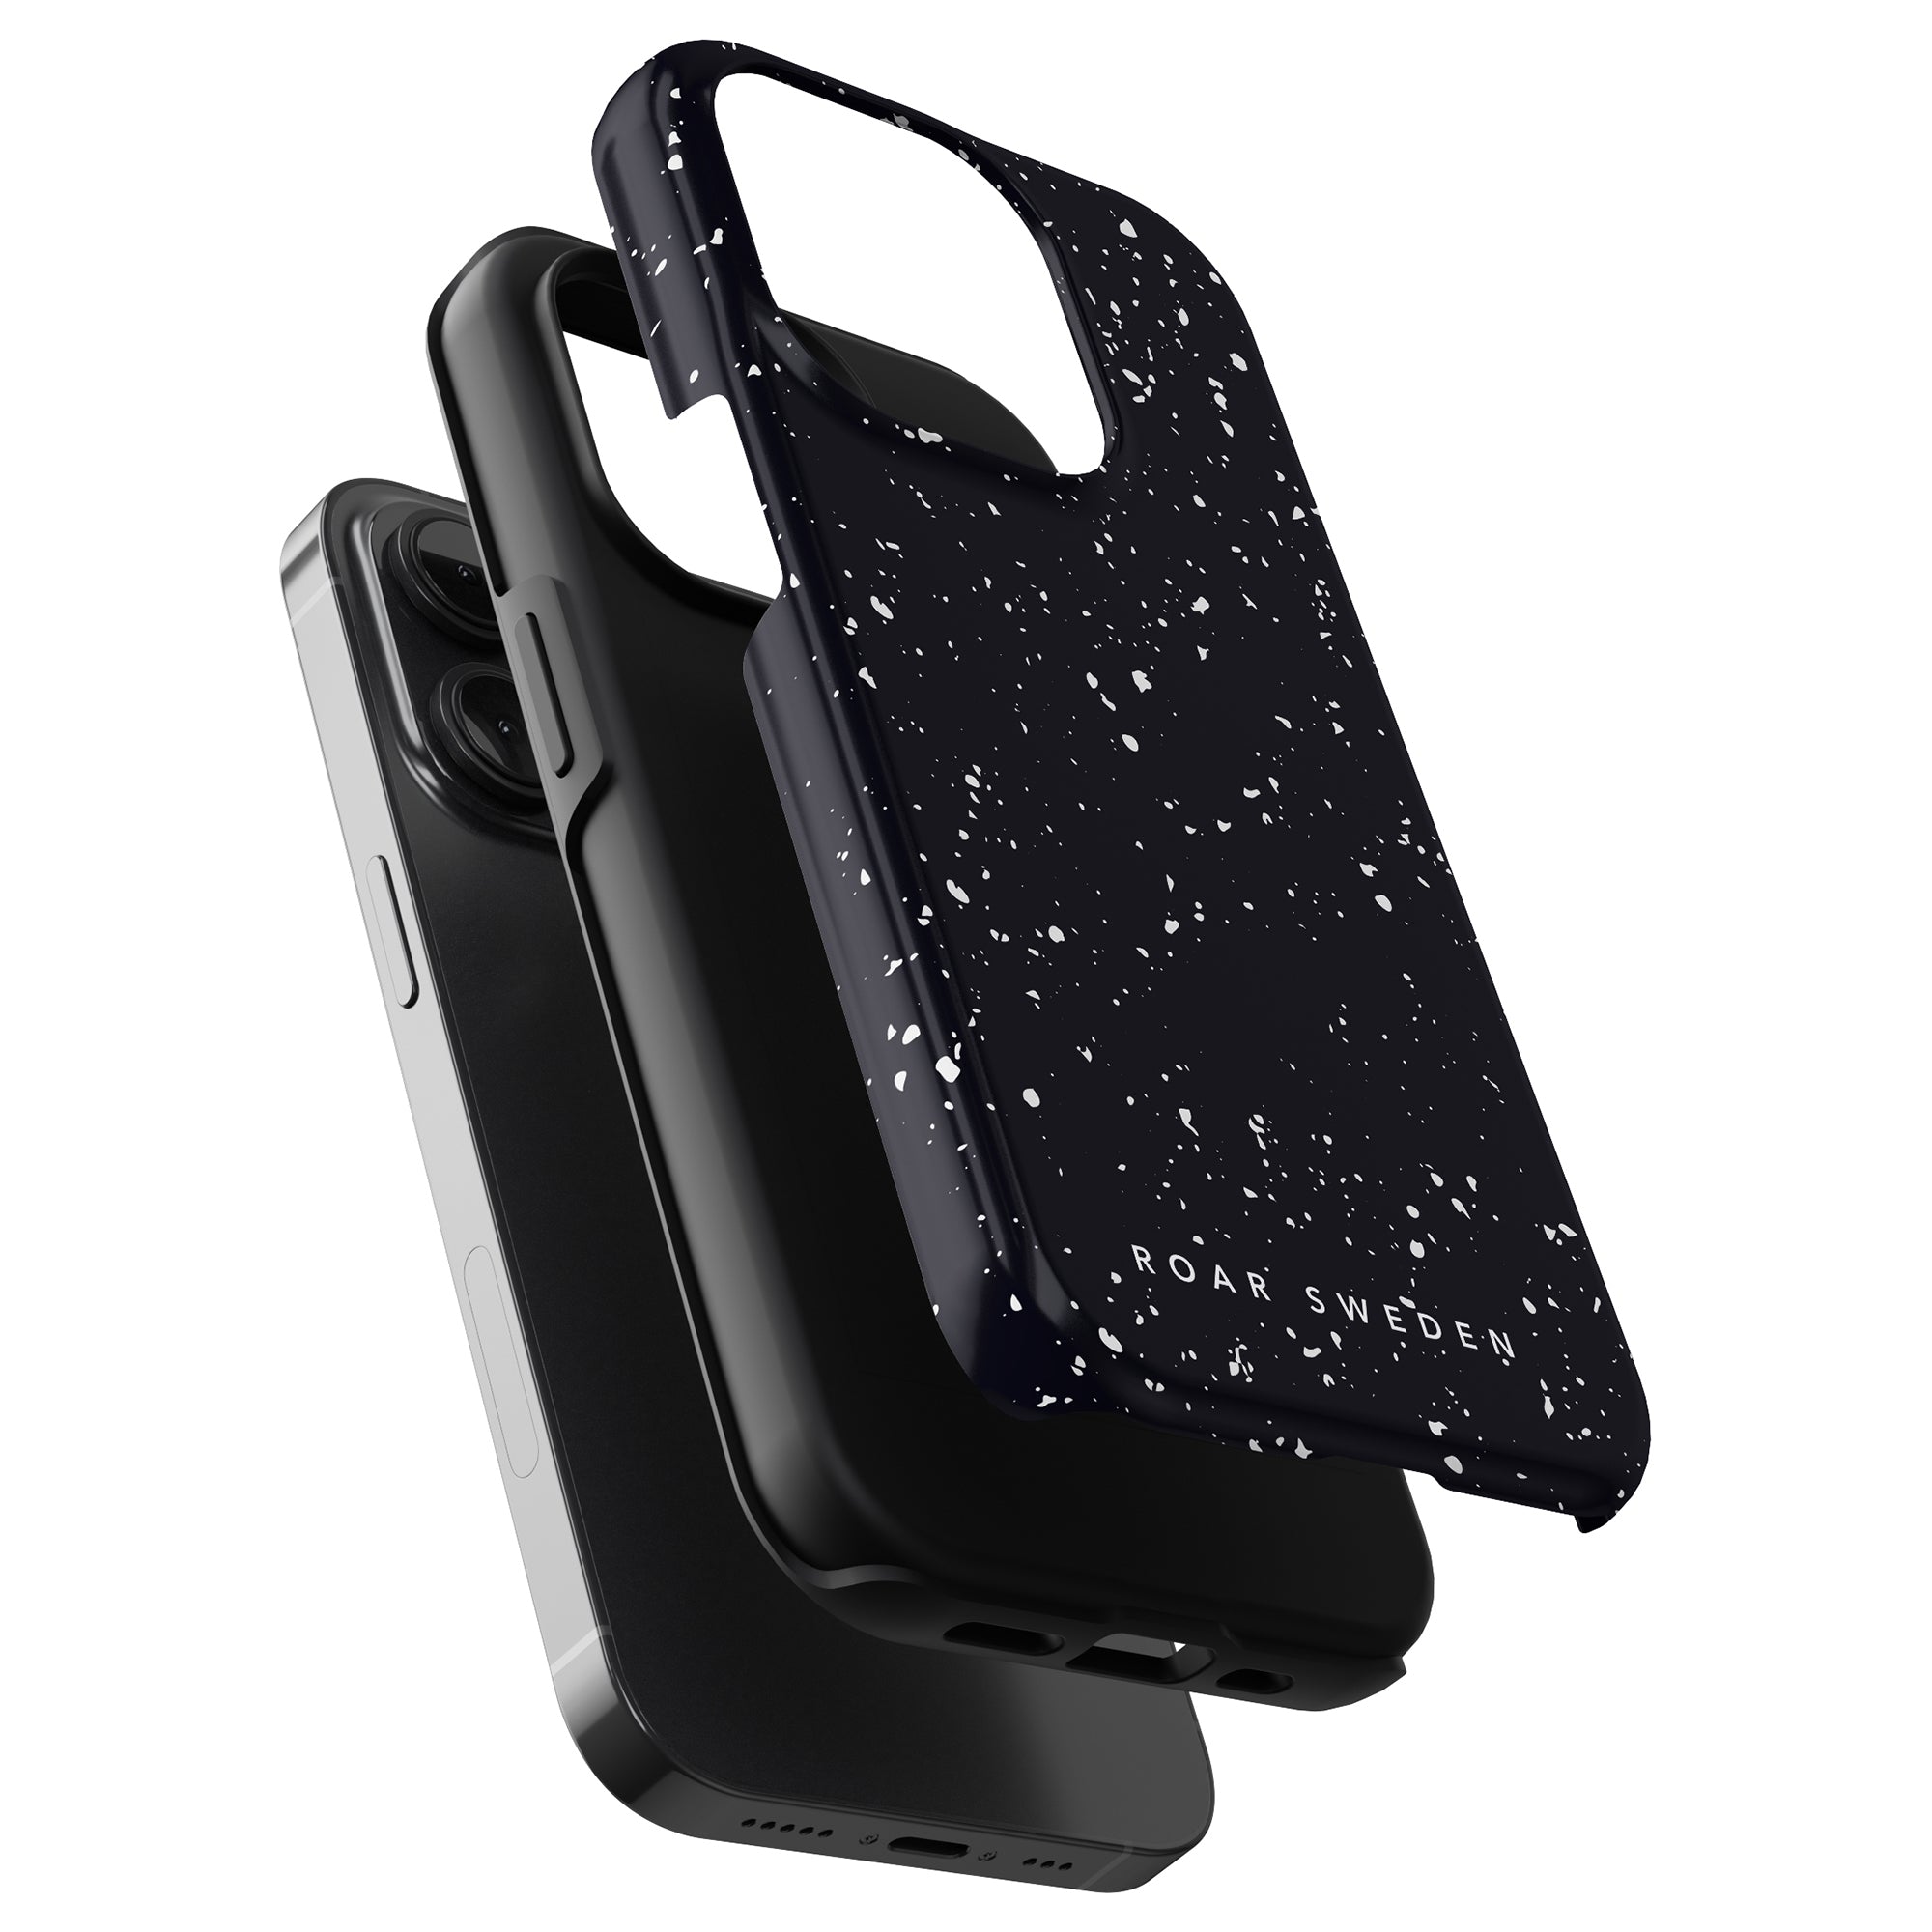 A black smartphone with a Night Stars - Tough Case alongside a matching portable battery pack.